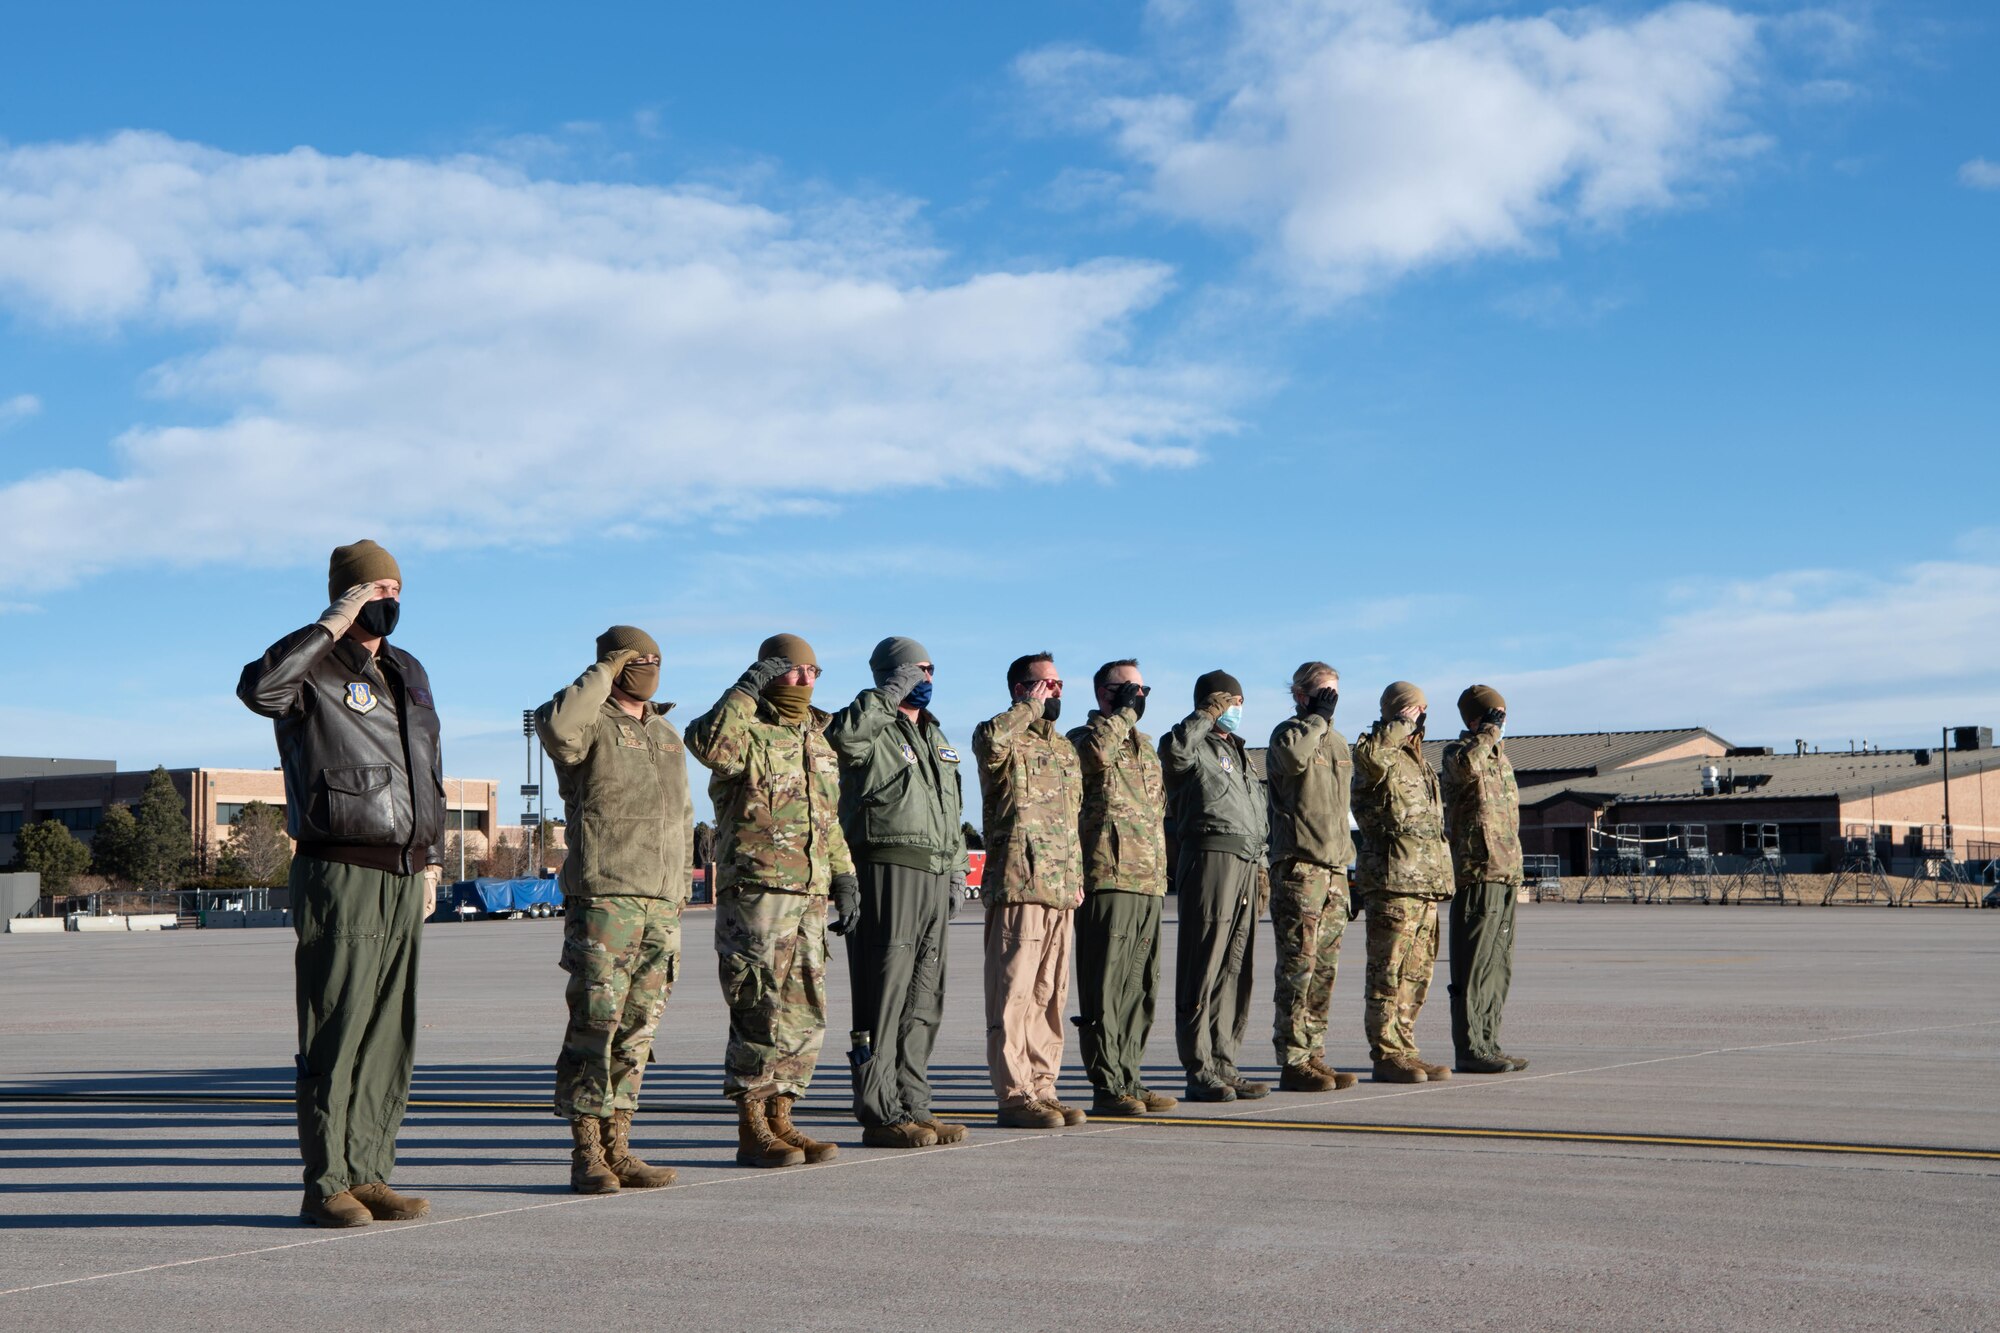 Leadership from the 302nd Airlift Wing deliver the final salute to members aboard a C-130 aircraft before they depart to an undisclosured location Feb. 5, 2021, Peterson Air Force Base, Colorado.